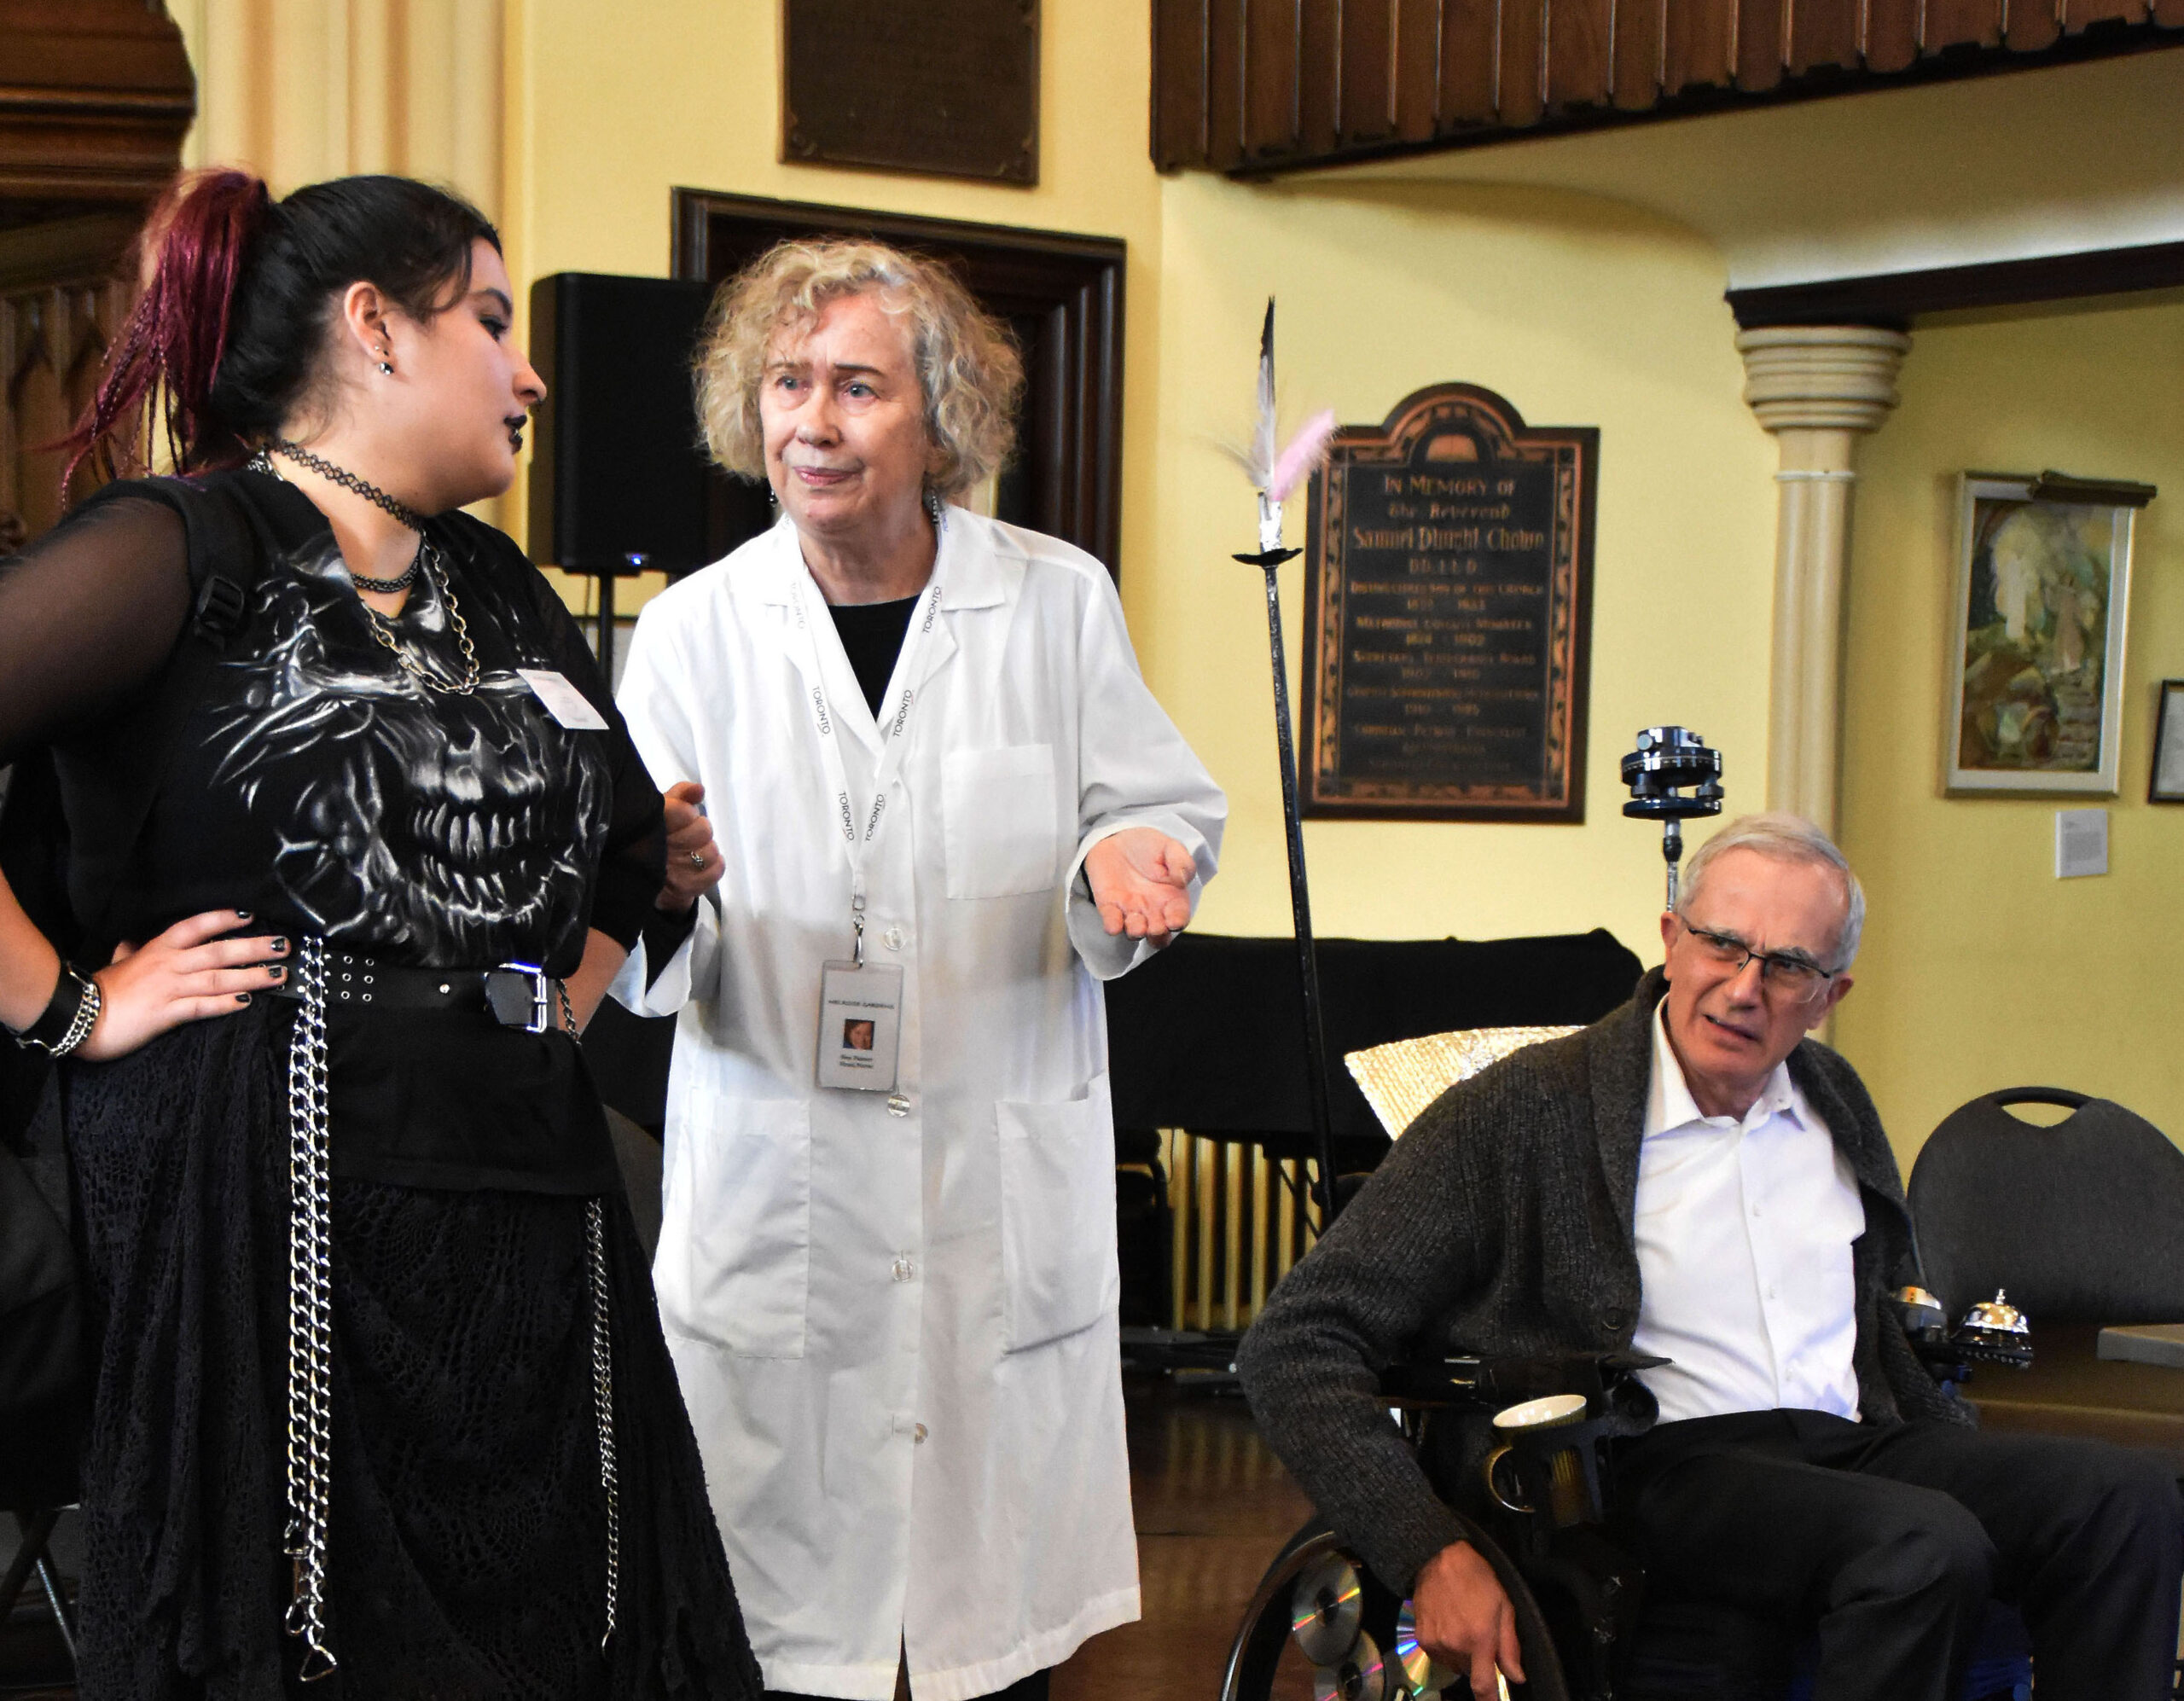 A woman dressed in black clothing, a woman dressed in a white lab coat, and a man in a wheelchair are interacting.